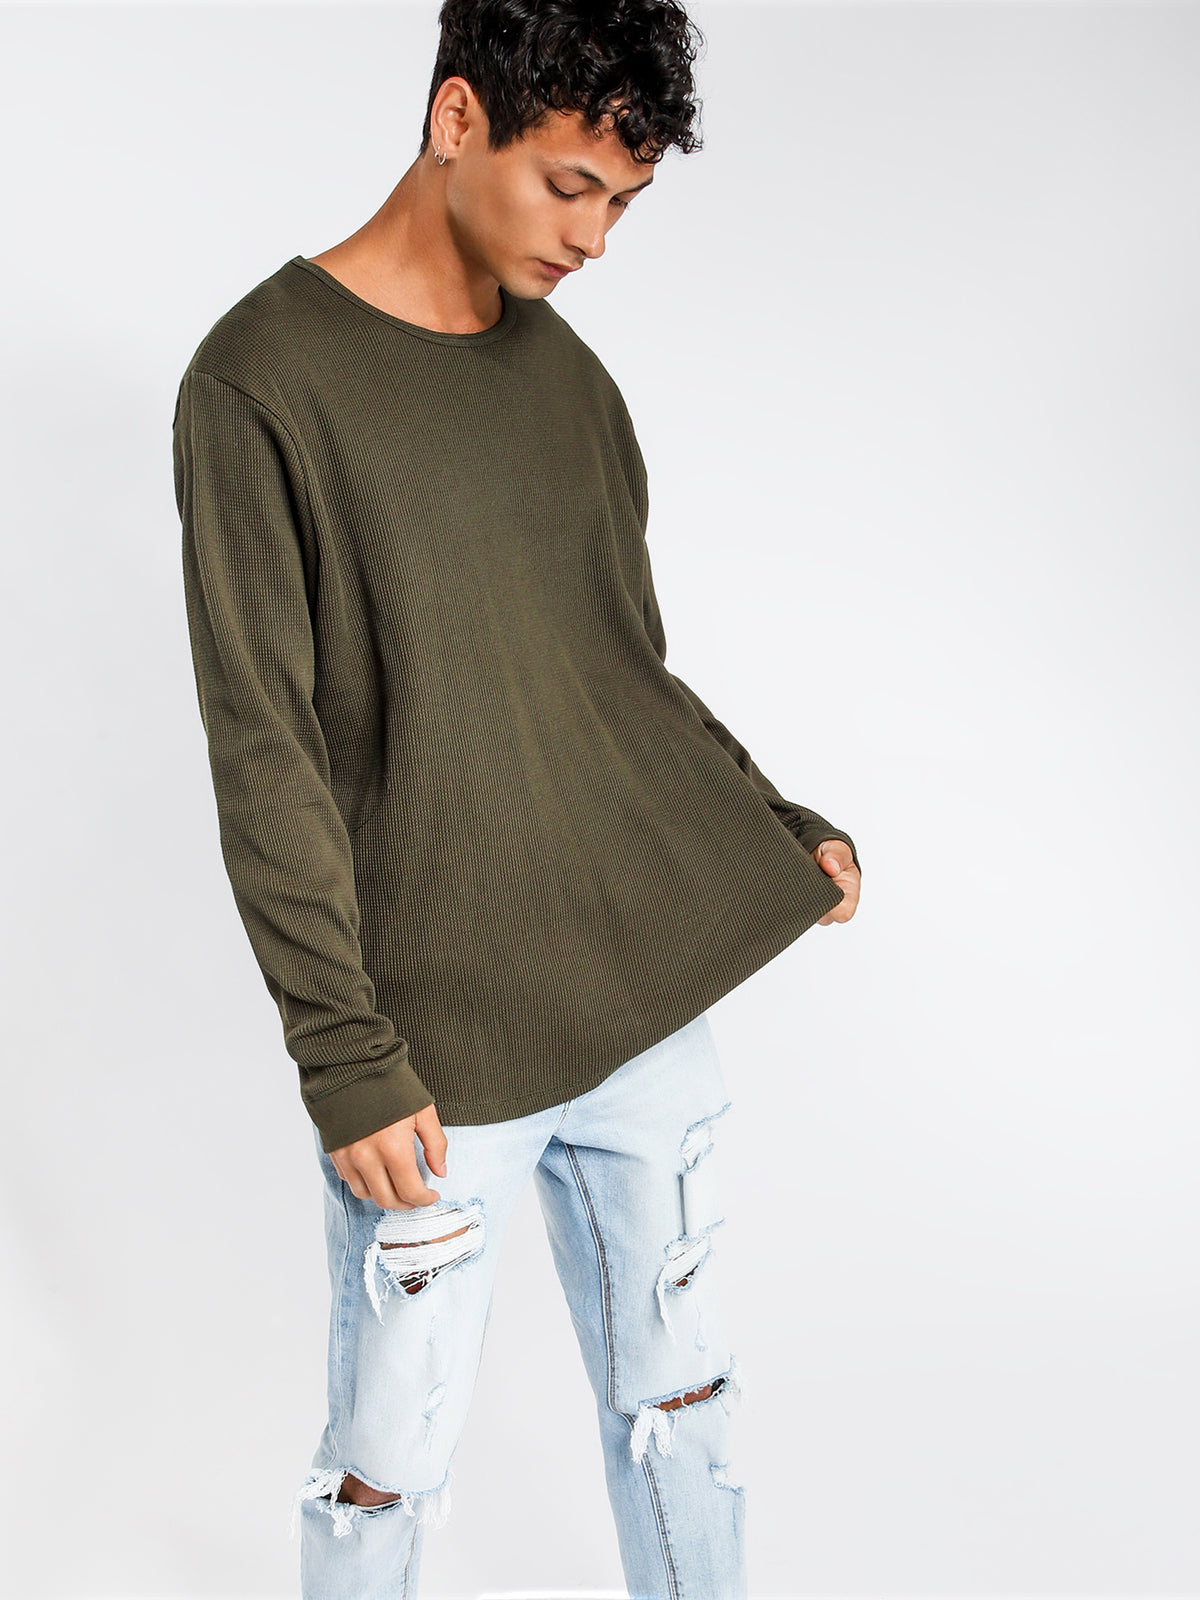 Waffle Long Sleeve Crew Top in Military Green